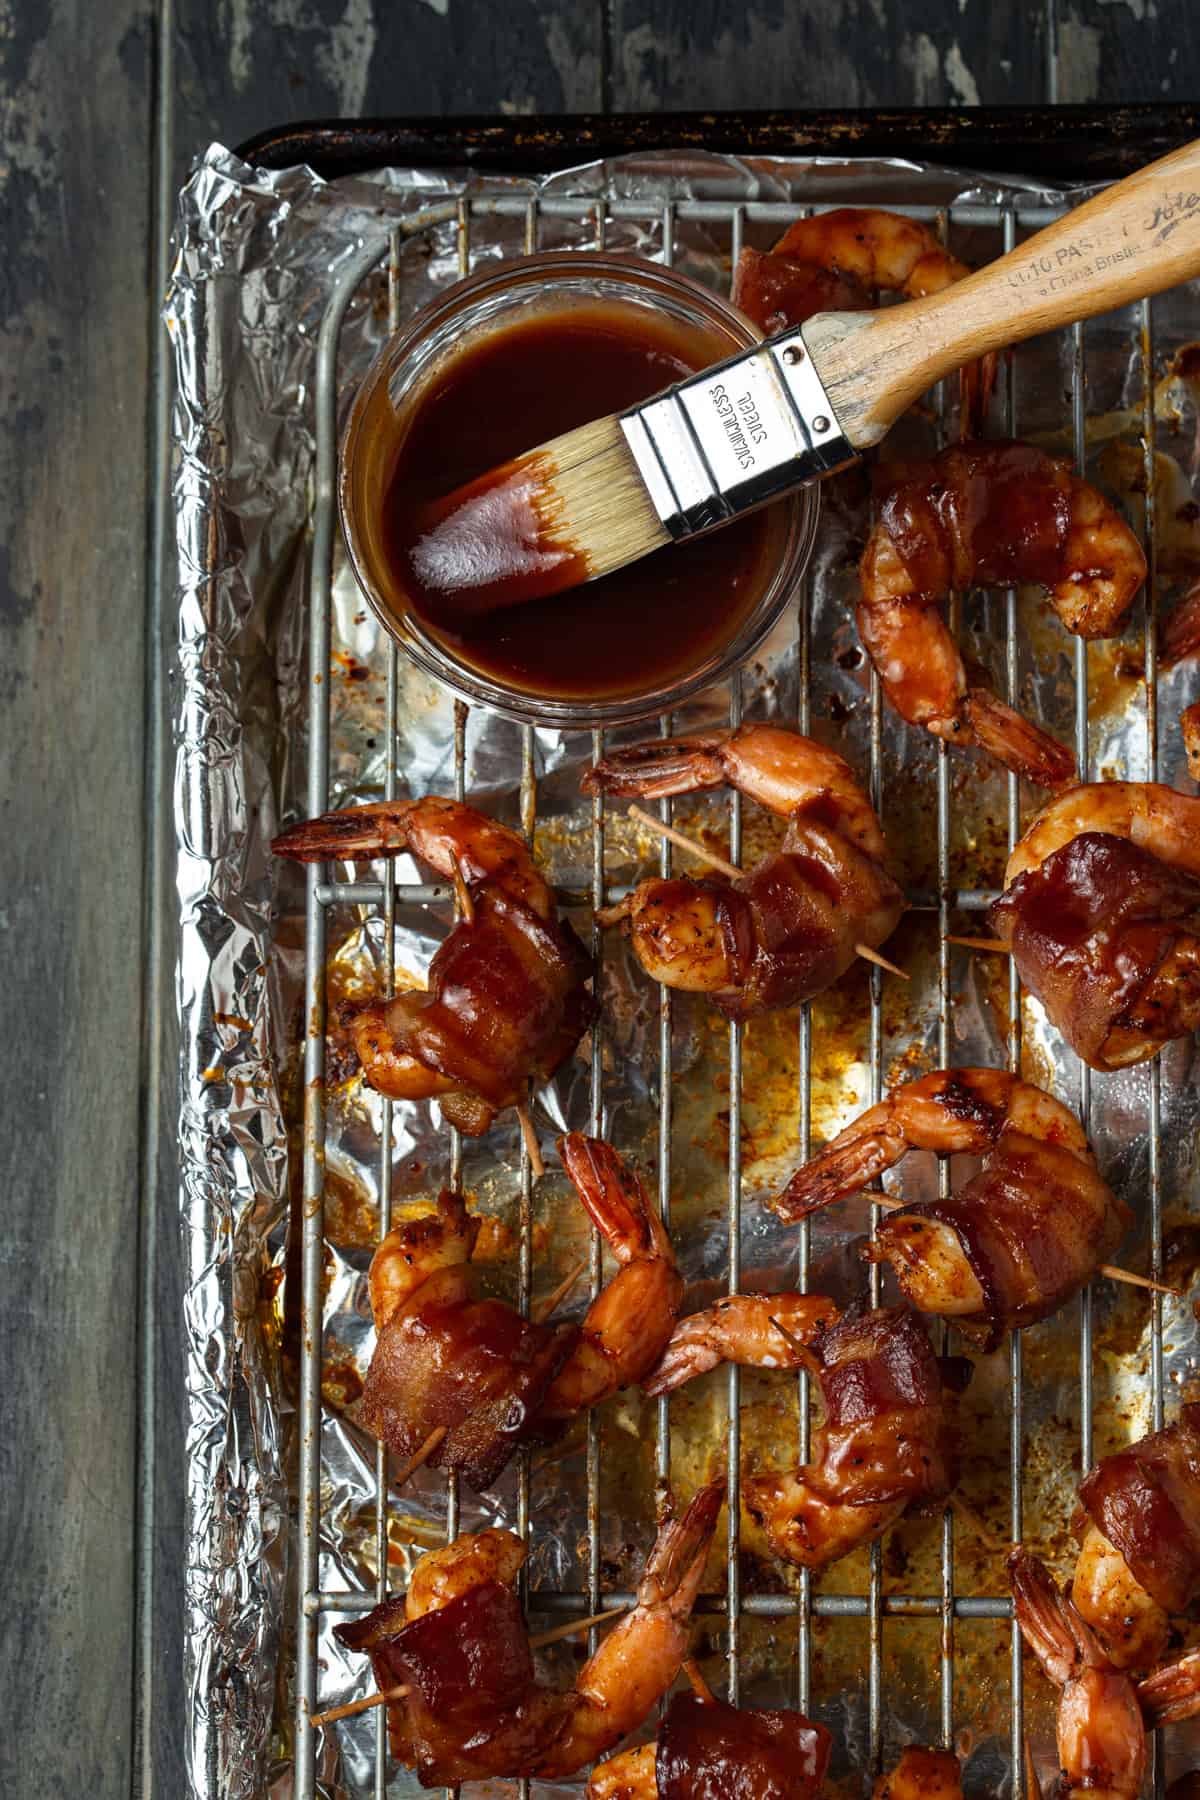 shrimp on a baking sheet with barbecue sauce and brush.